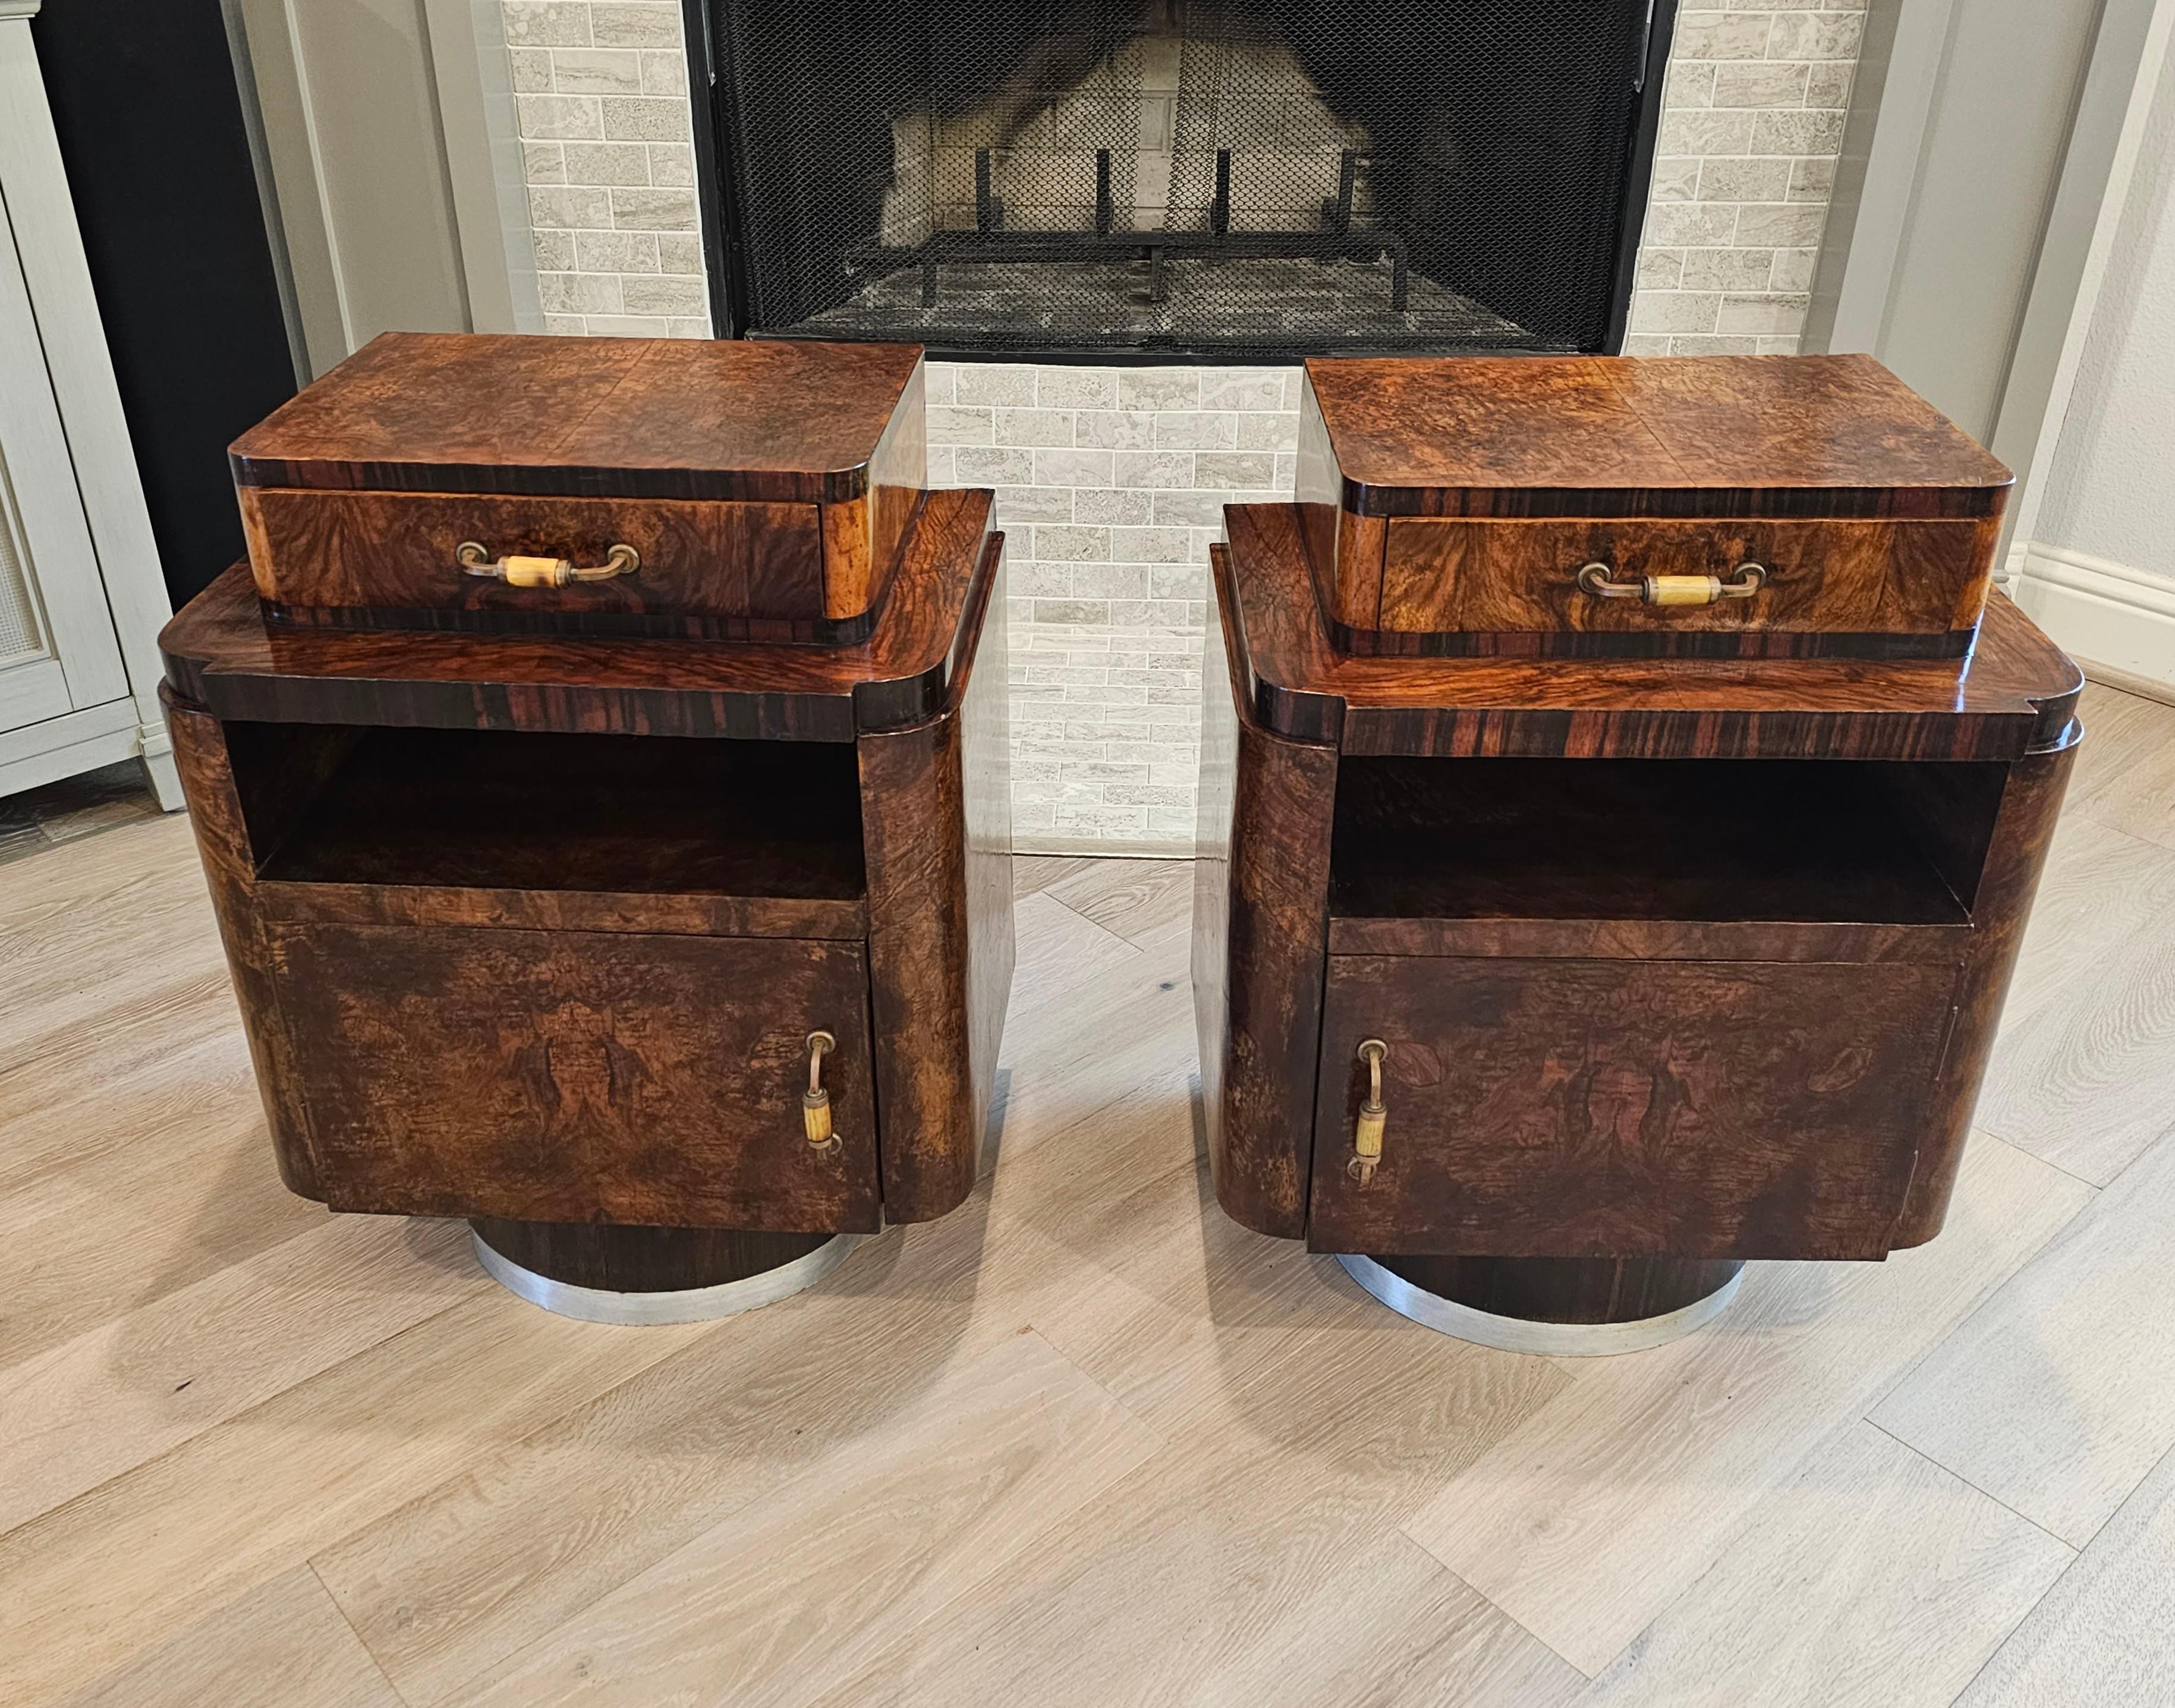 A visually striking pair of original Italian Art Deco burlwood bedside tables (nightstand - end table). Featuring the brilliant contrast of smooth rounded edges, sharp angles, and rich exotic materials the Art Deco period is renowned for!

Born in